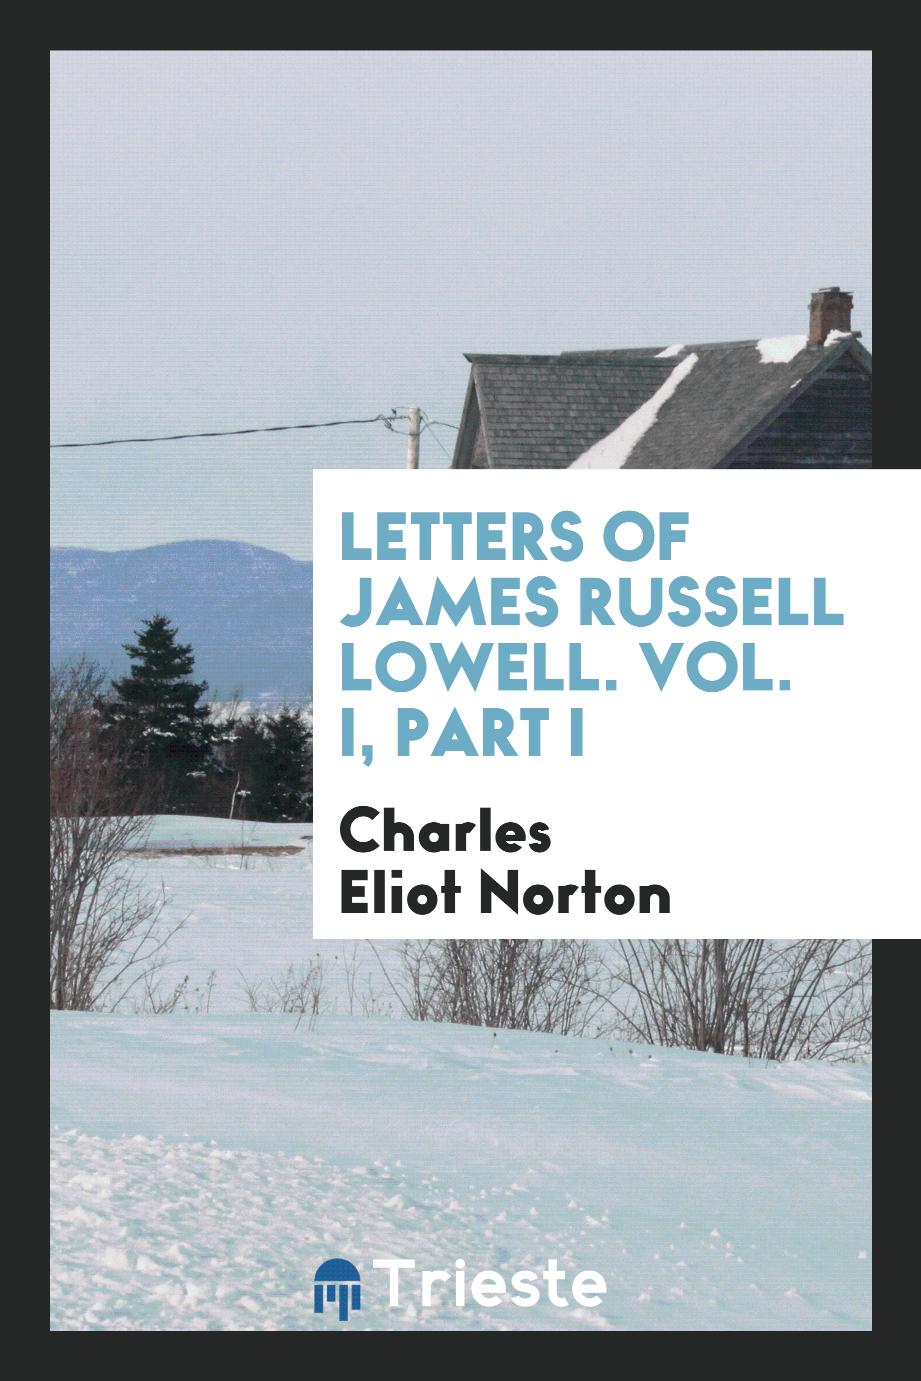 Letters of James Russell Lowell. Vol. I, Part I